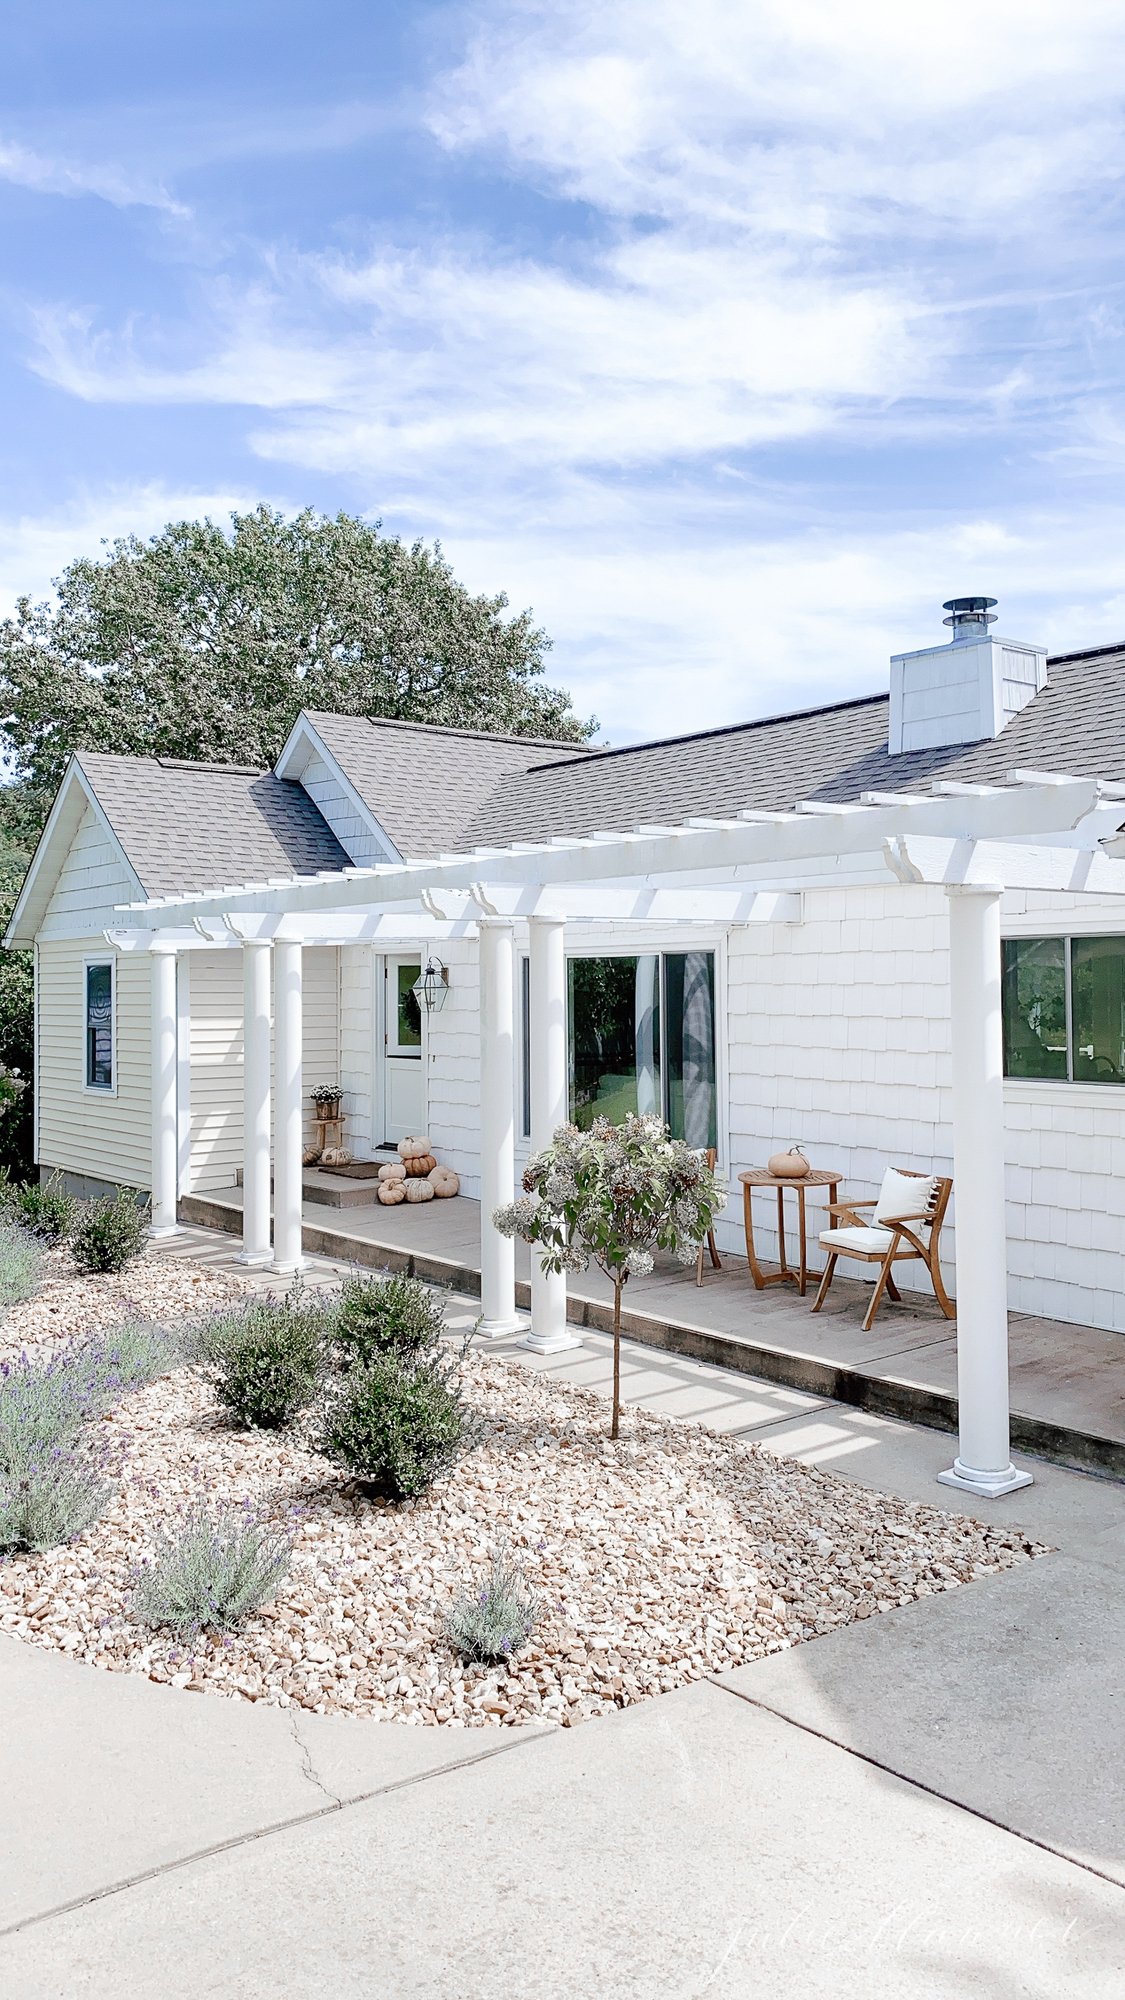 A white cottage with an attached front porch pergola